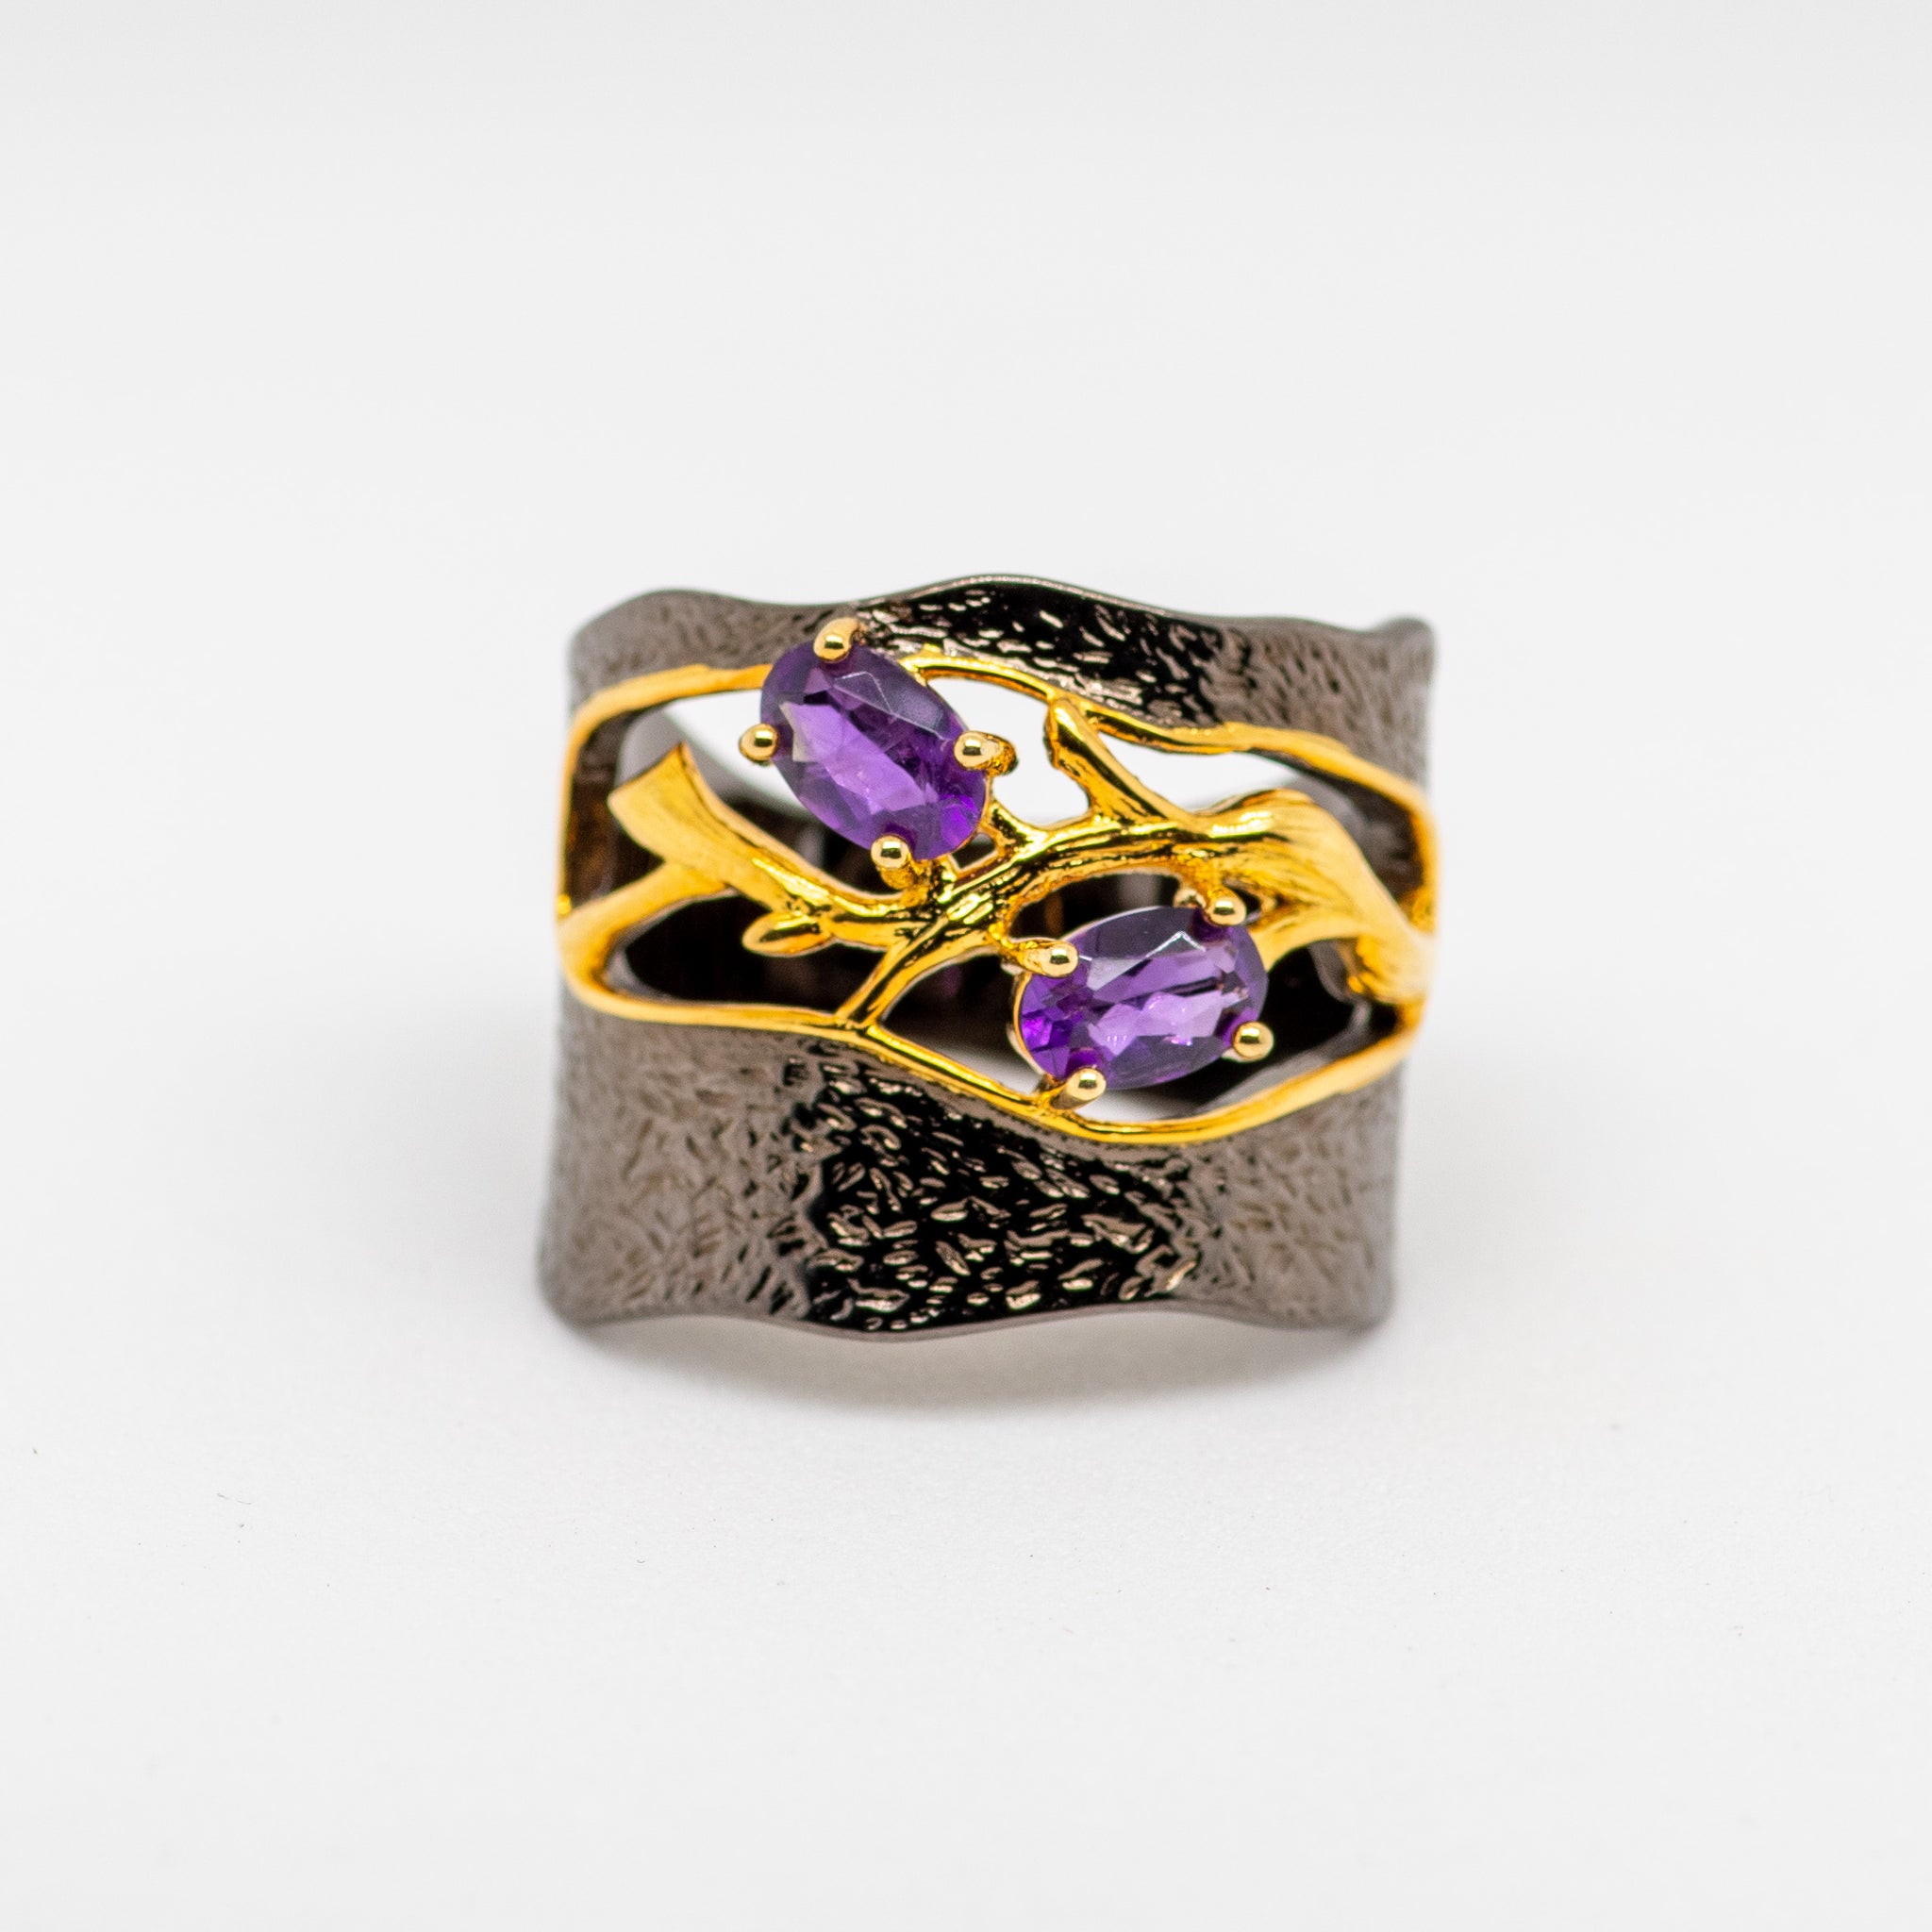 Wisteria Amethyst Ring in Sterling Silver - Heron and Swan